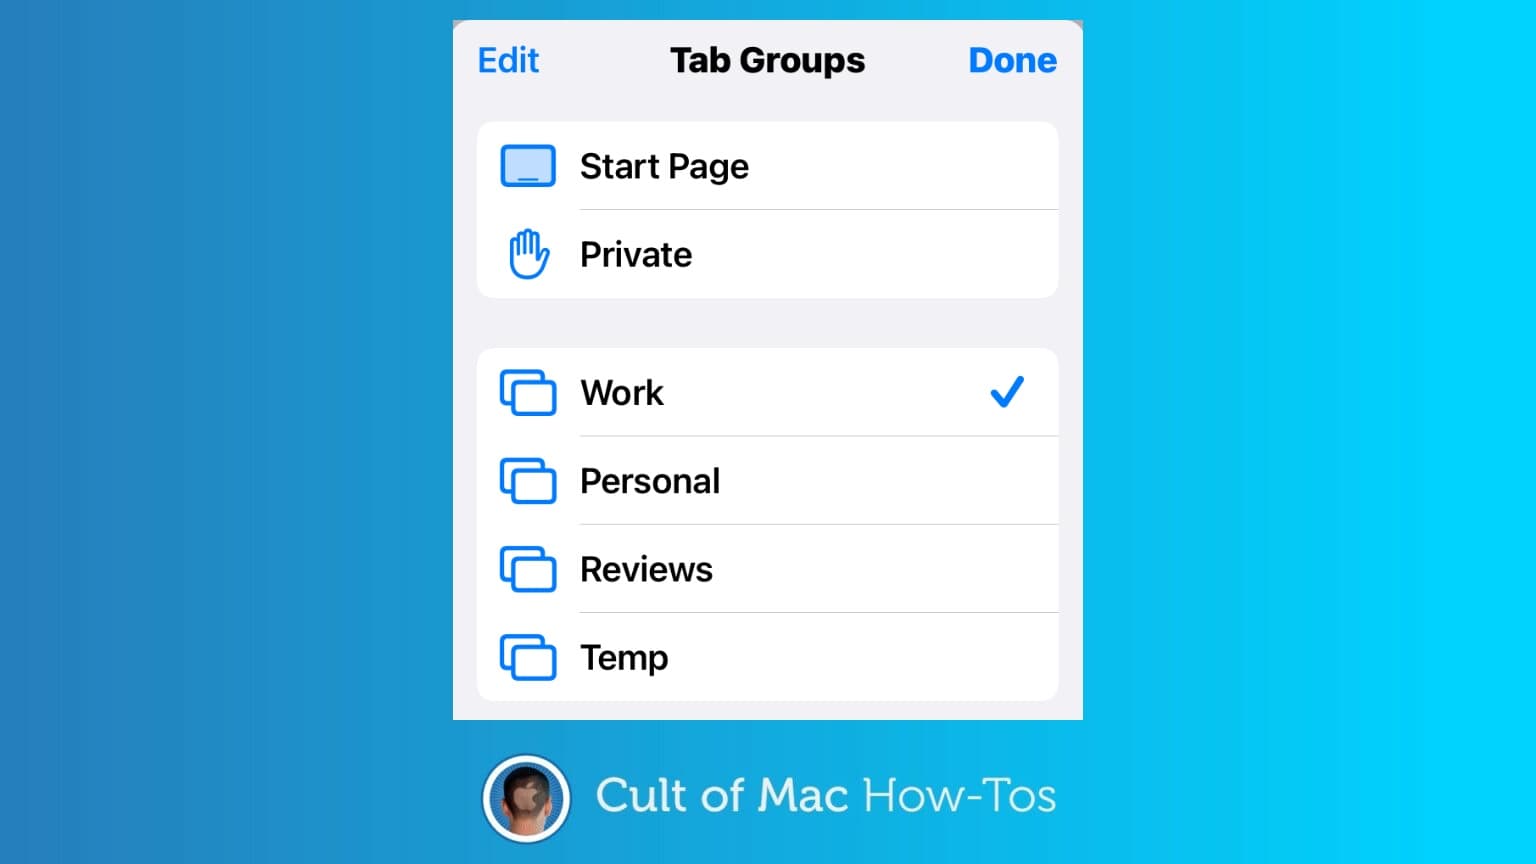 How to get organized with Safari Tab Groups